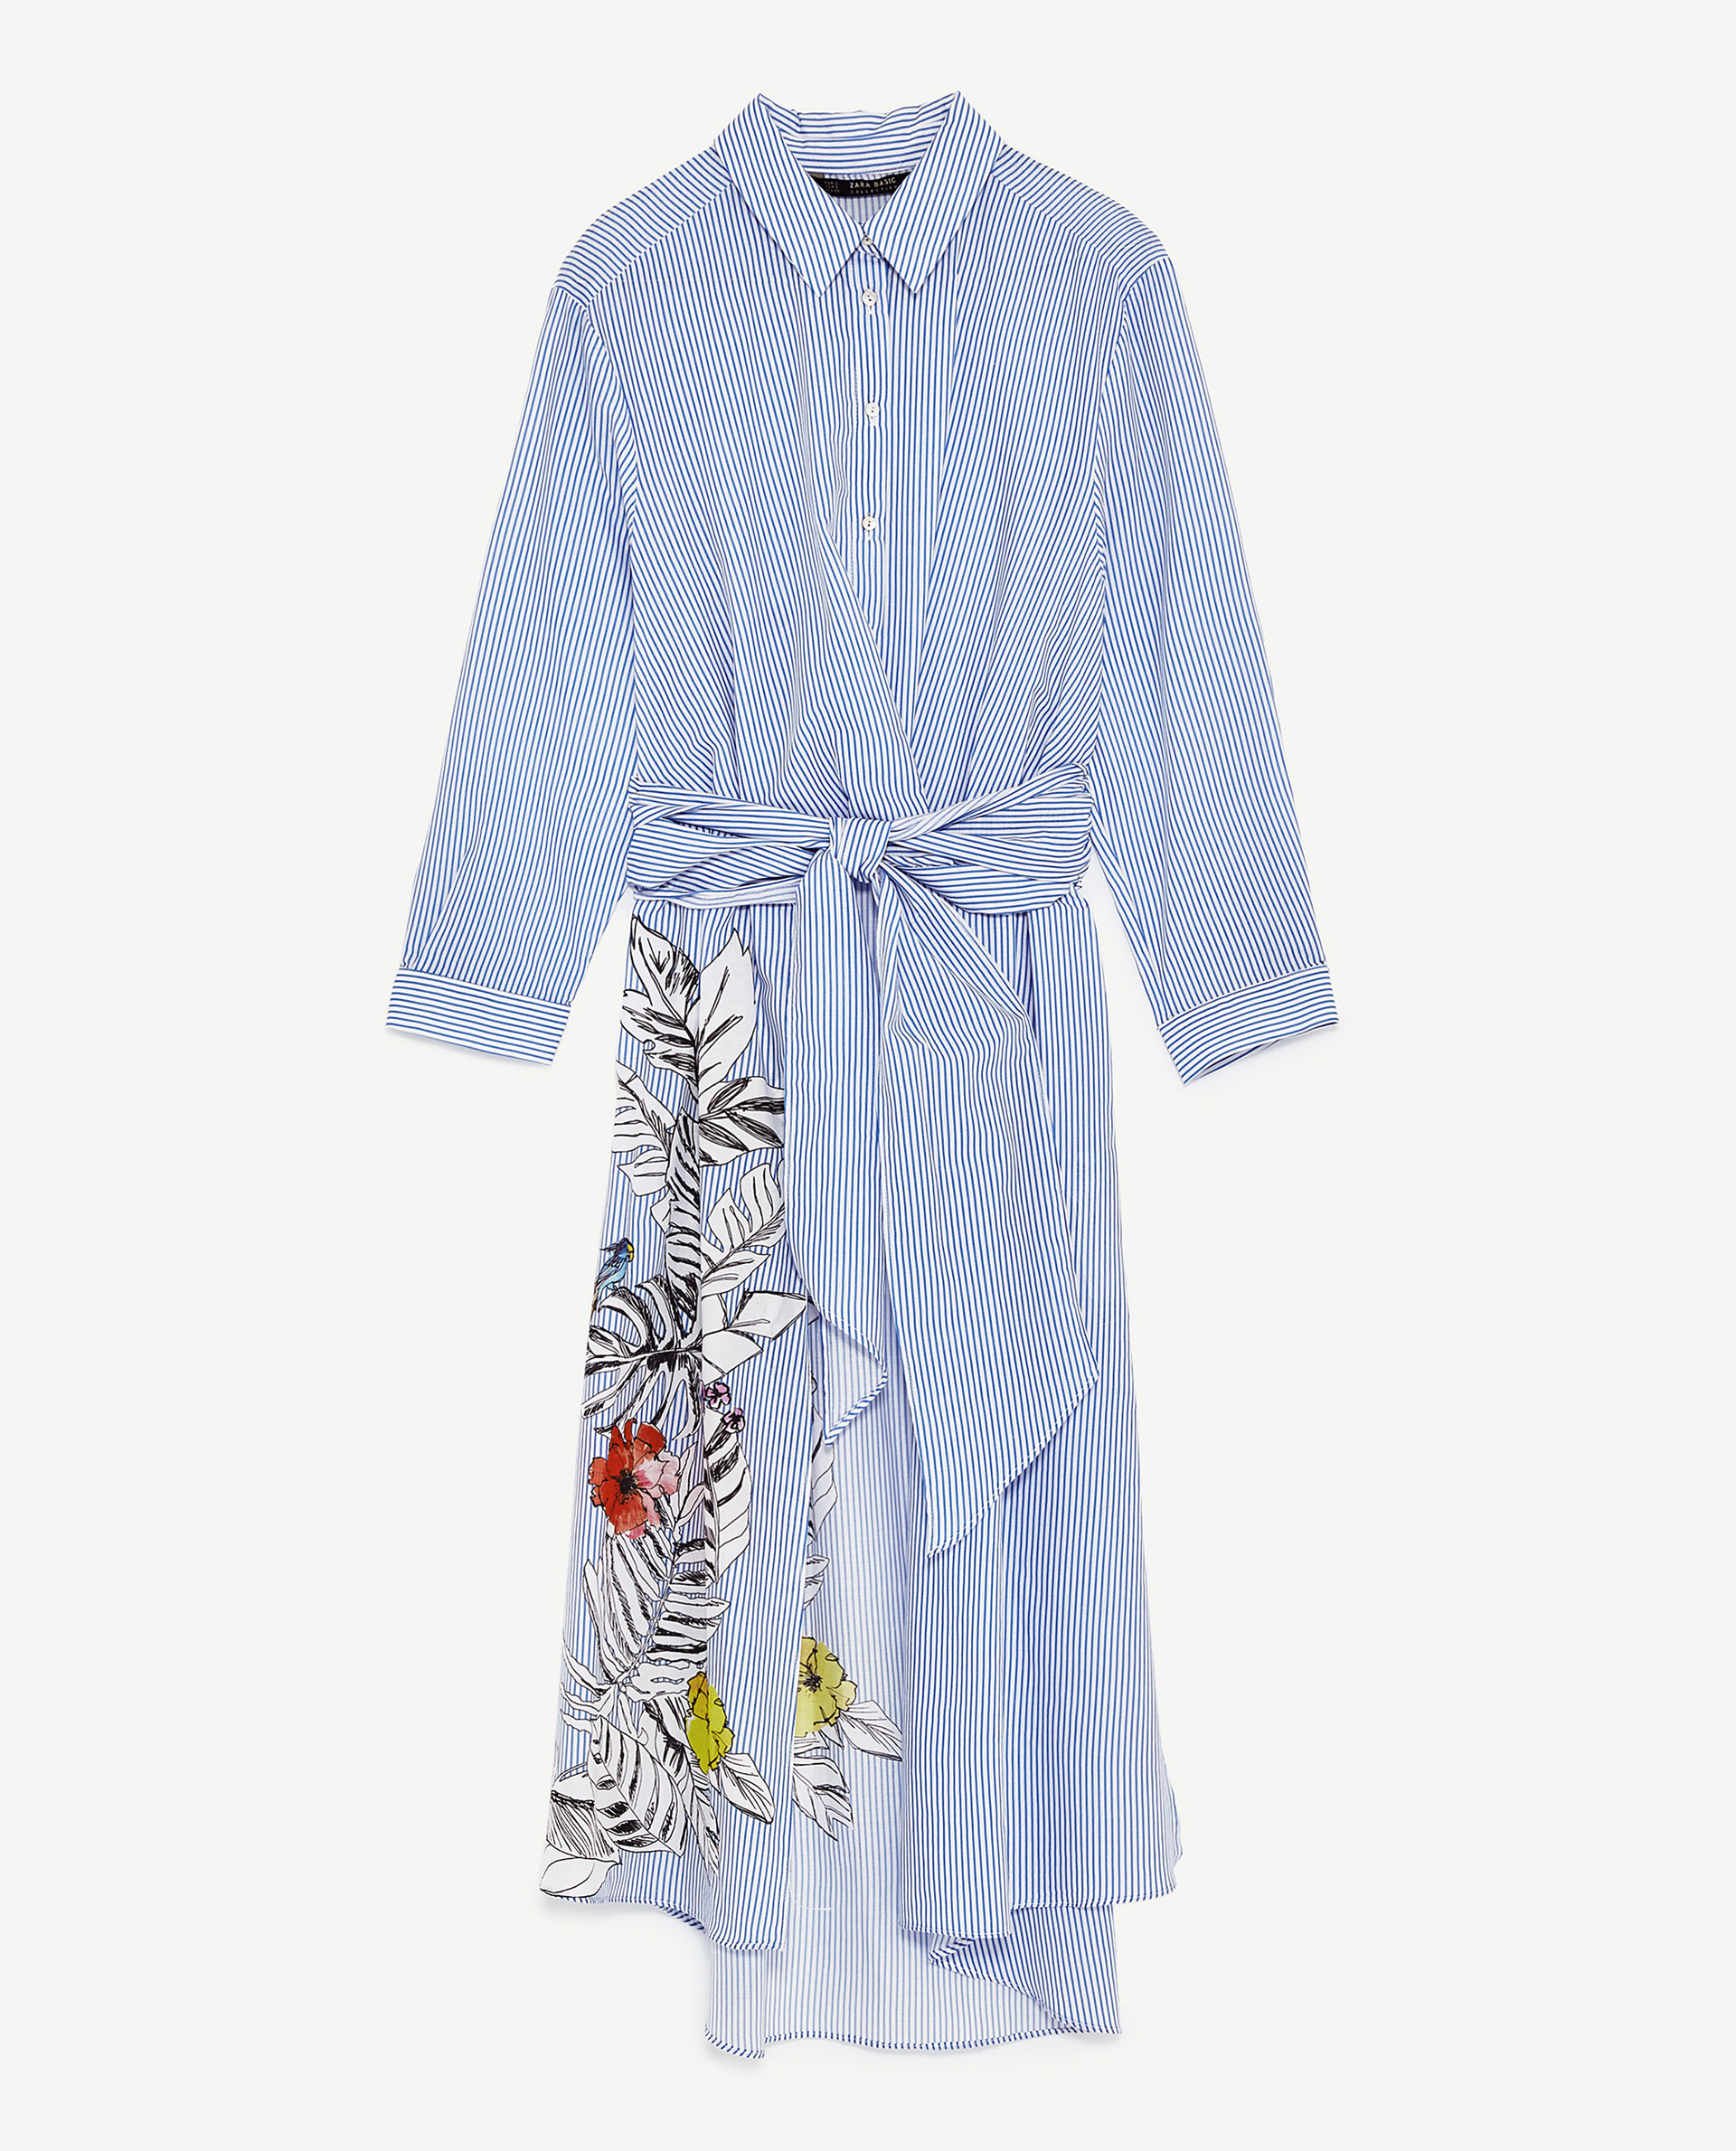 Zara's Striped Floral Embroidered Tunic 